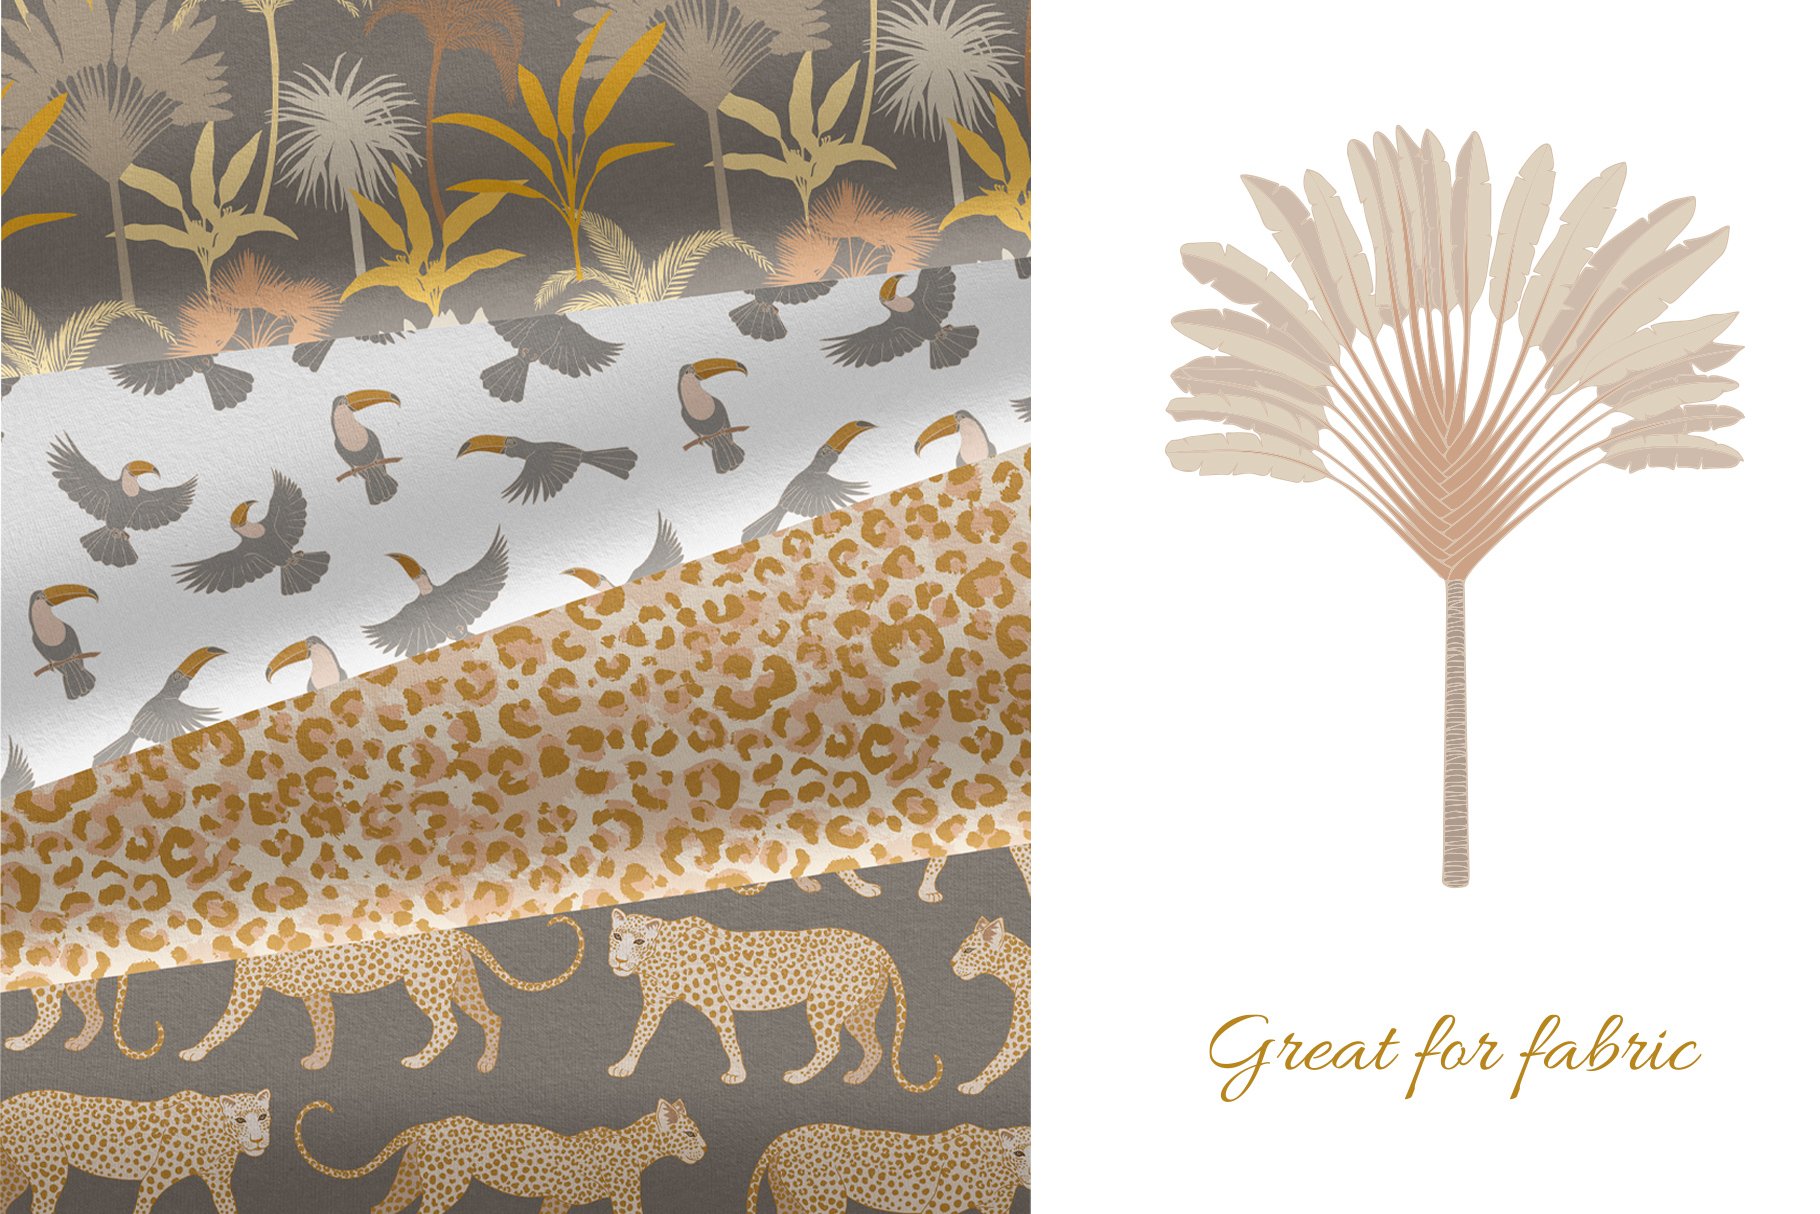 Some exotic patterns with animals prints.